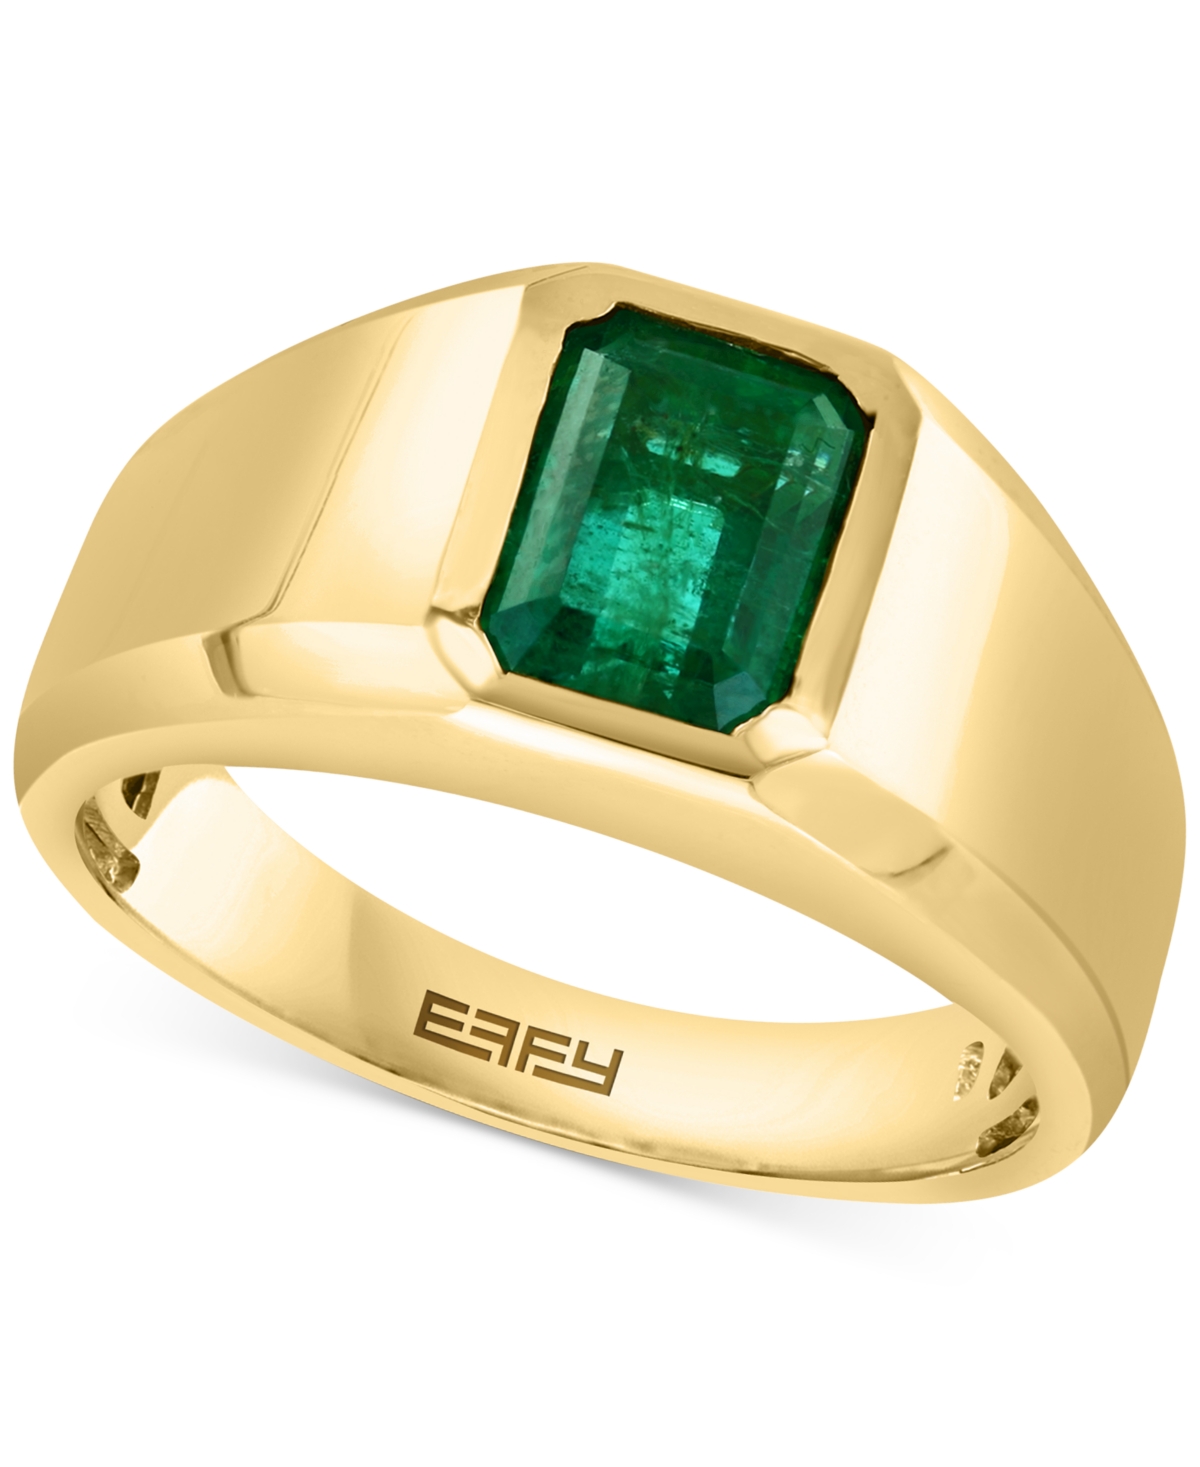 Effy Men's Emerald Solitaire Ring (2 ct. t.w.) in 14k Gold - Gold